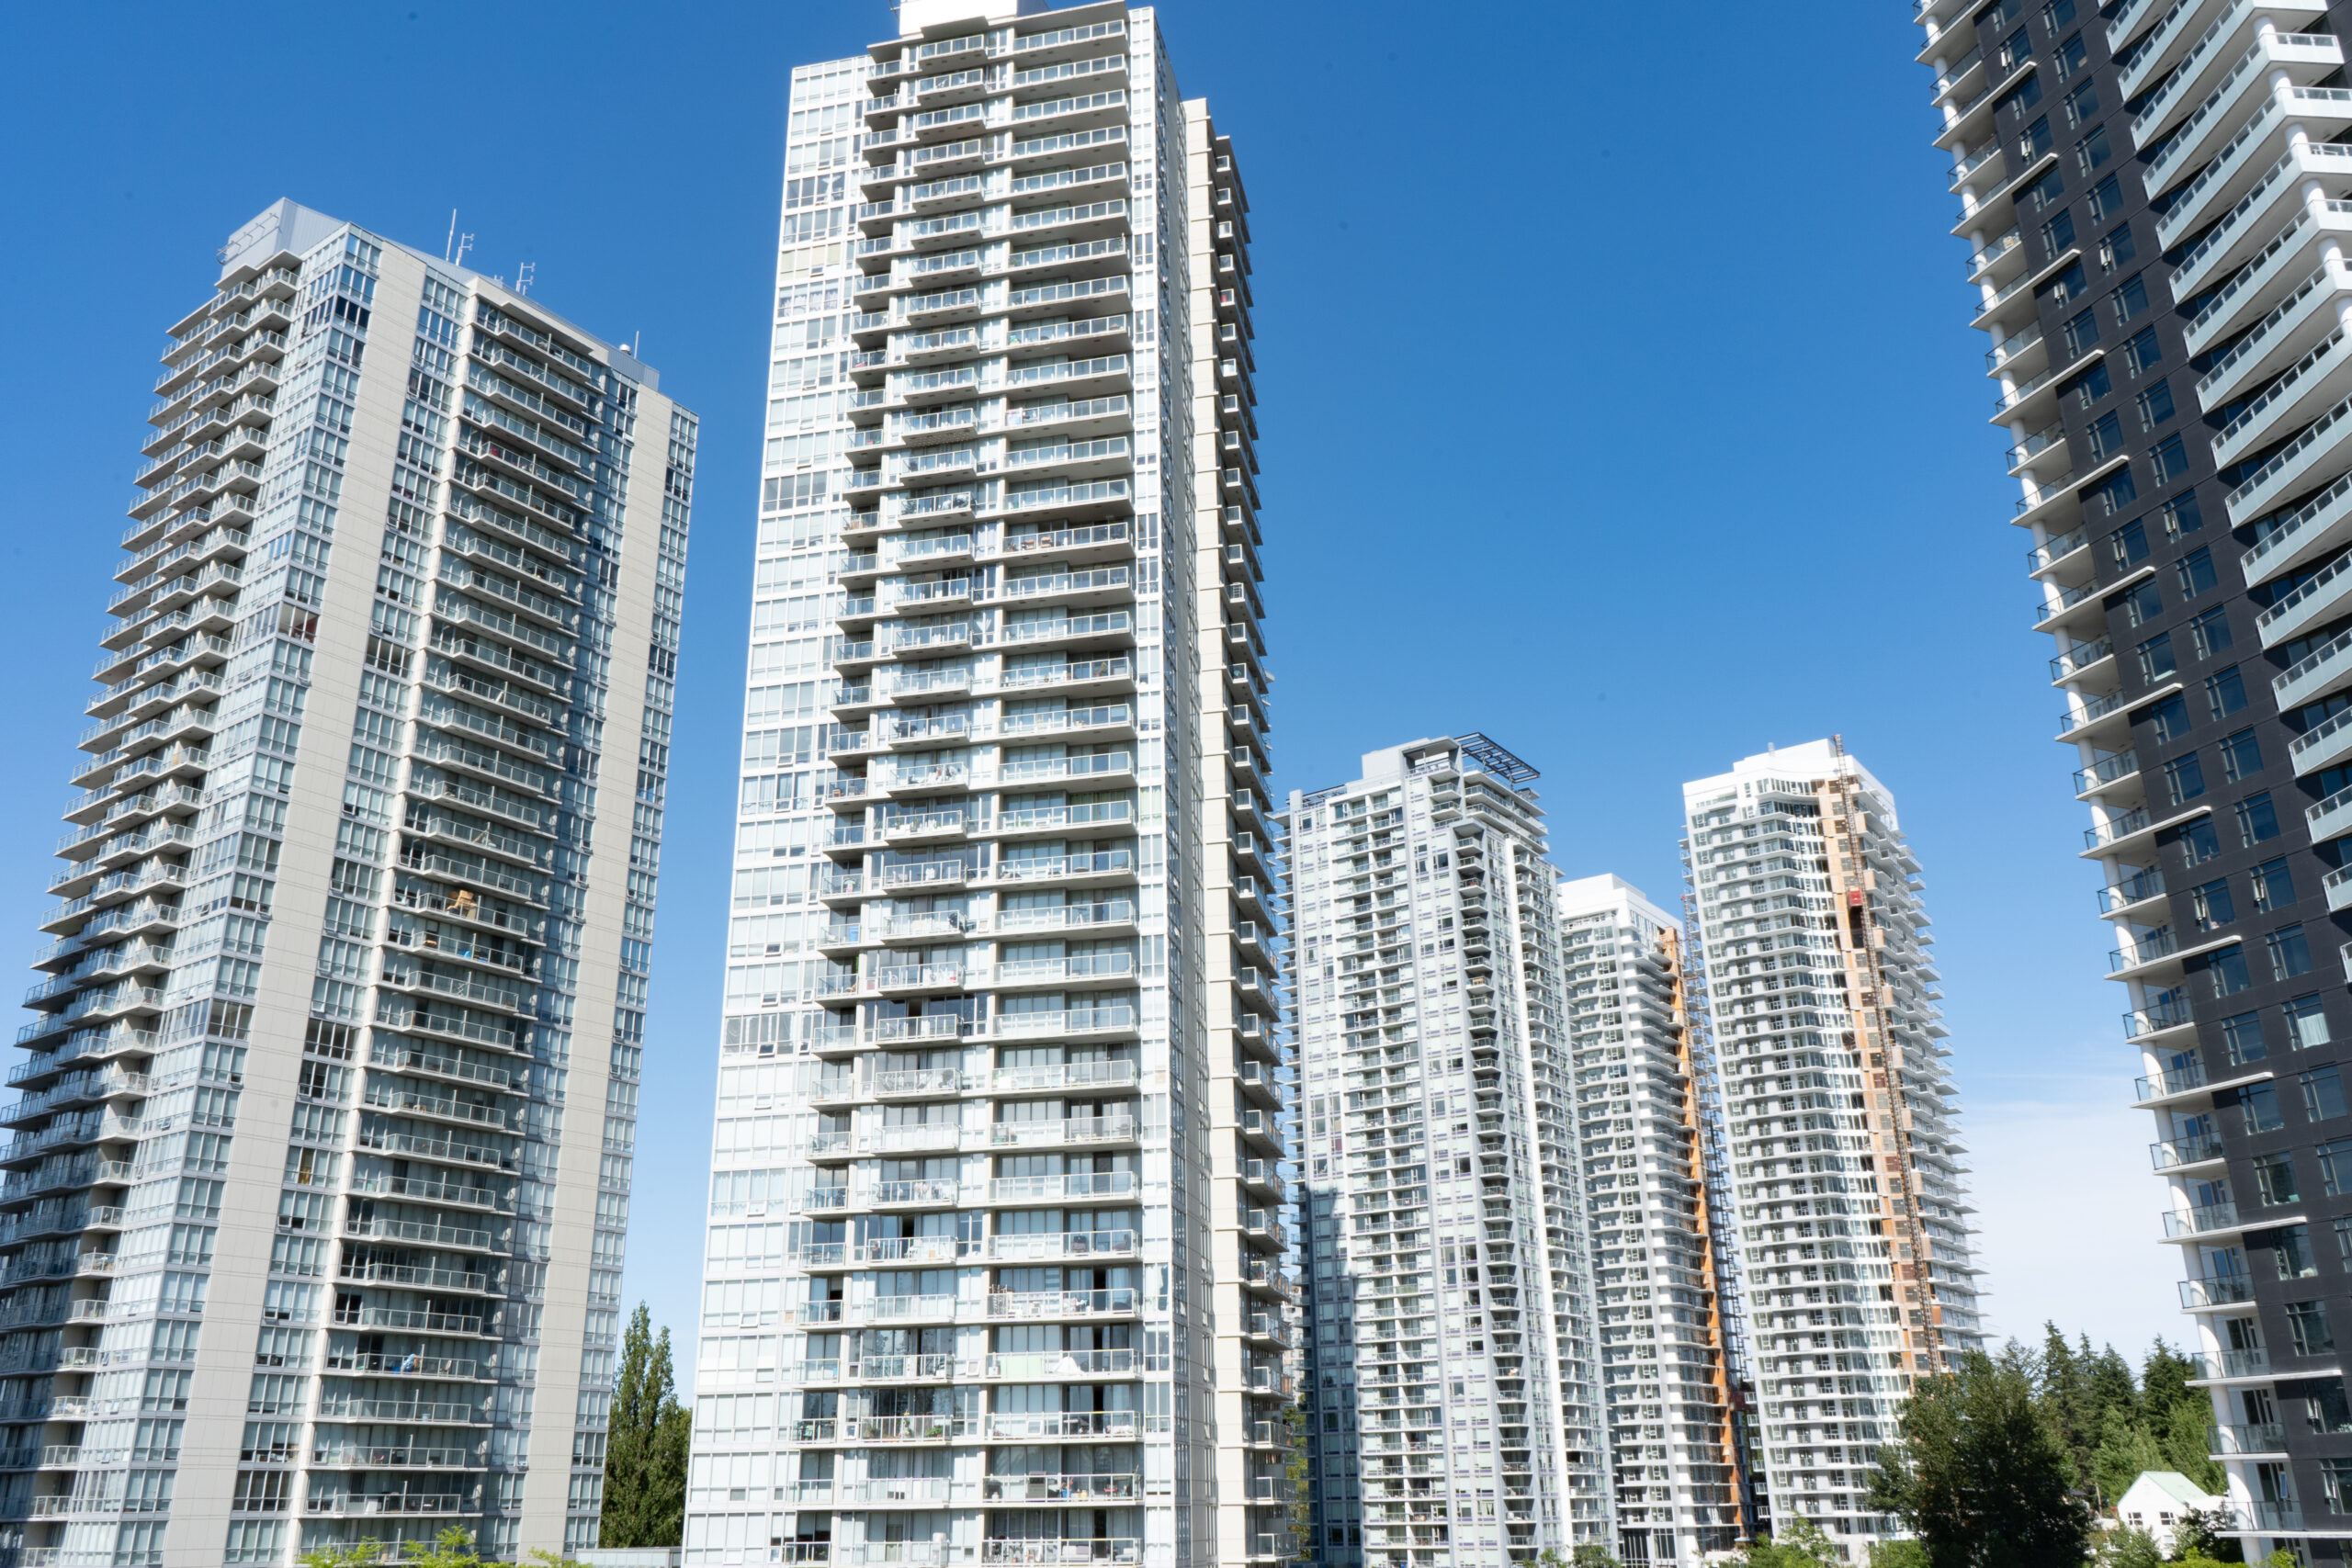 Photo of high-rise apartments in Surrey.